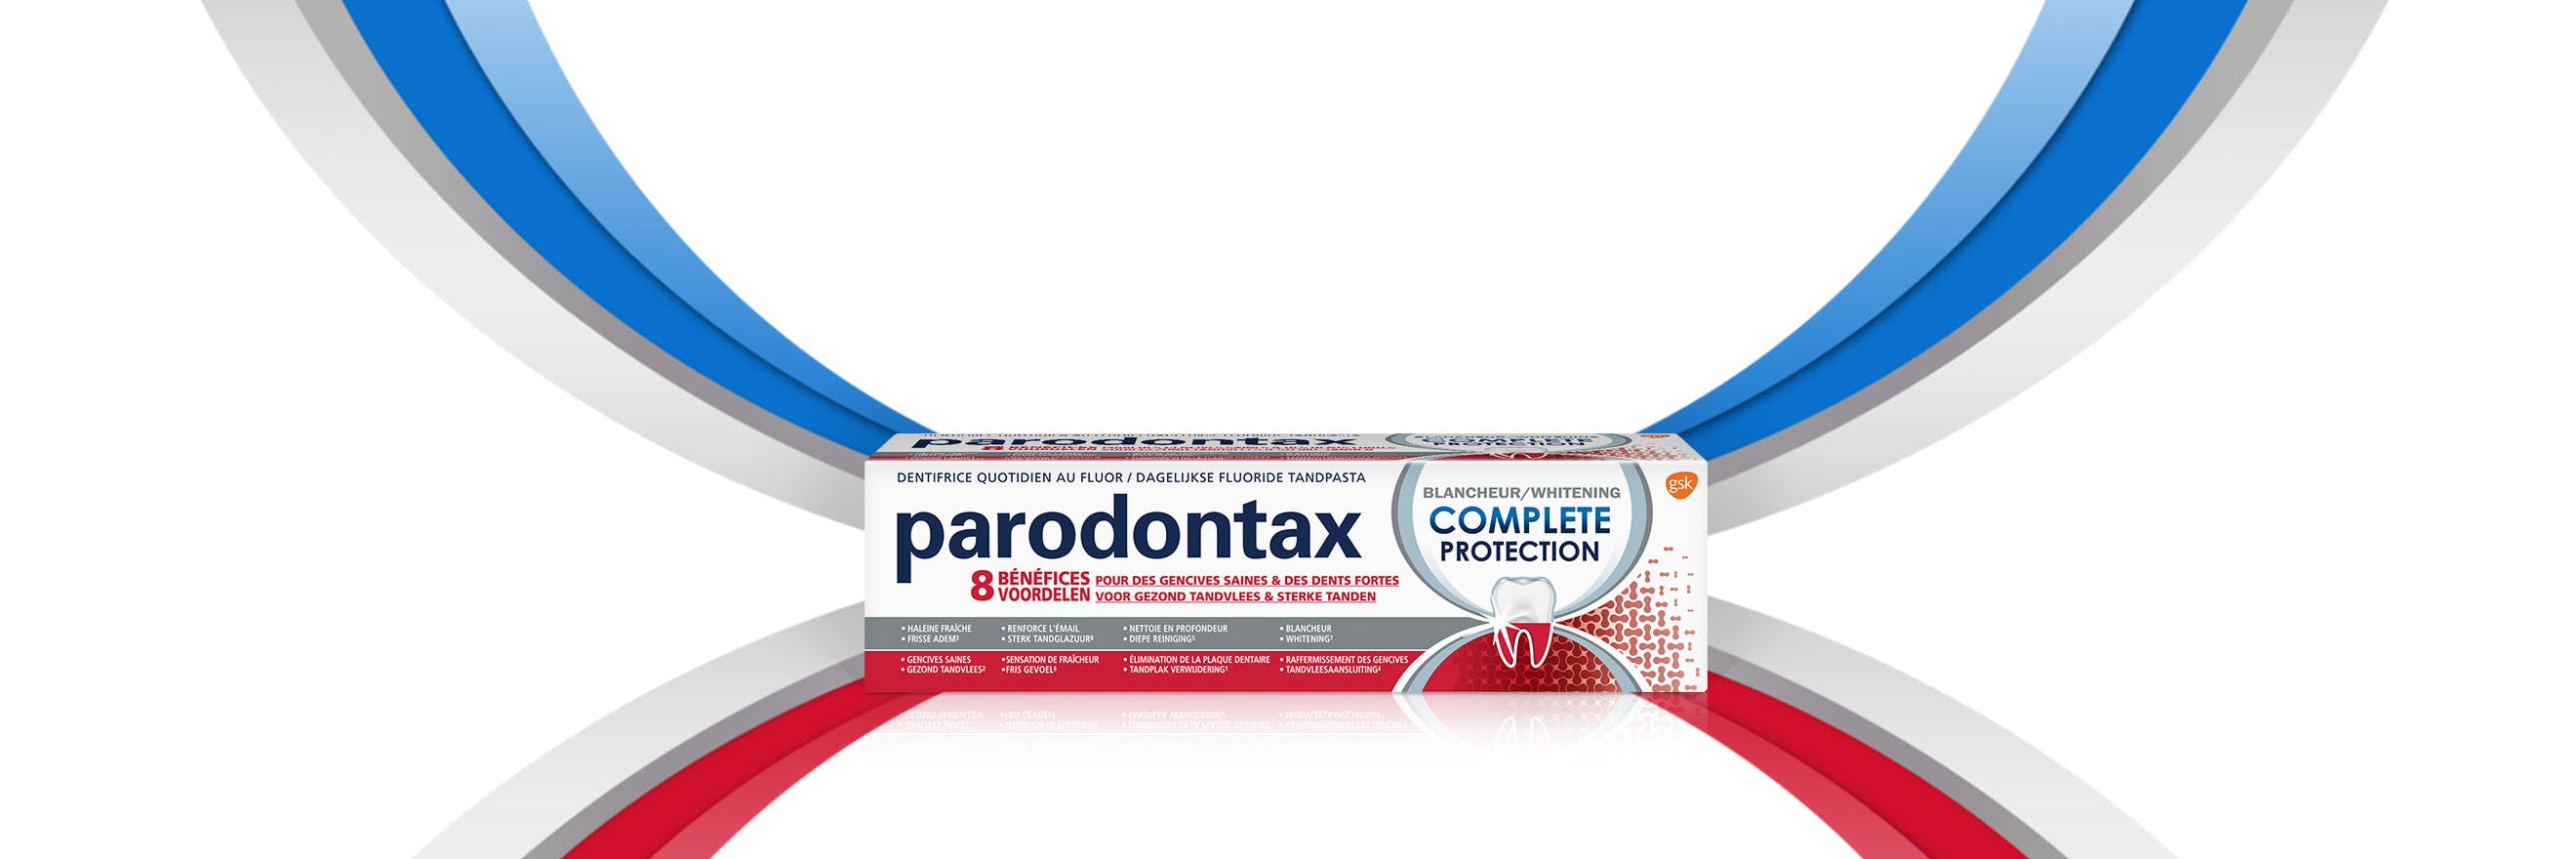 paradontax complete protection